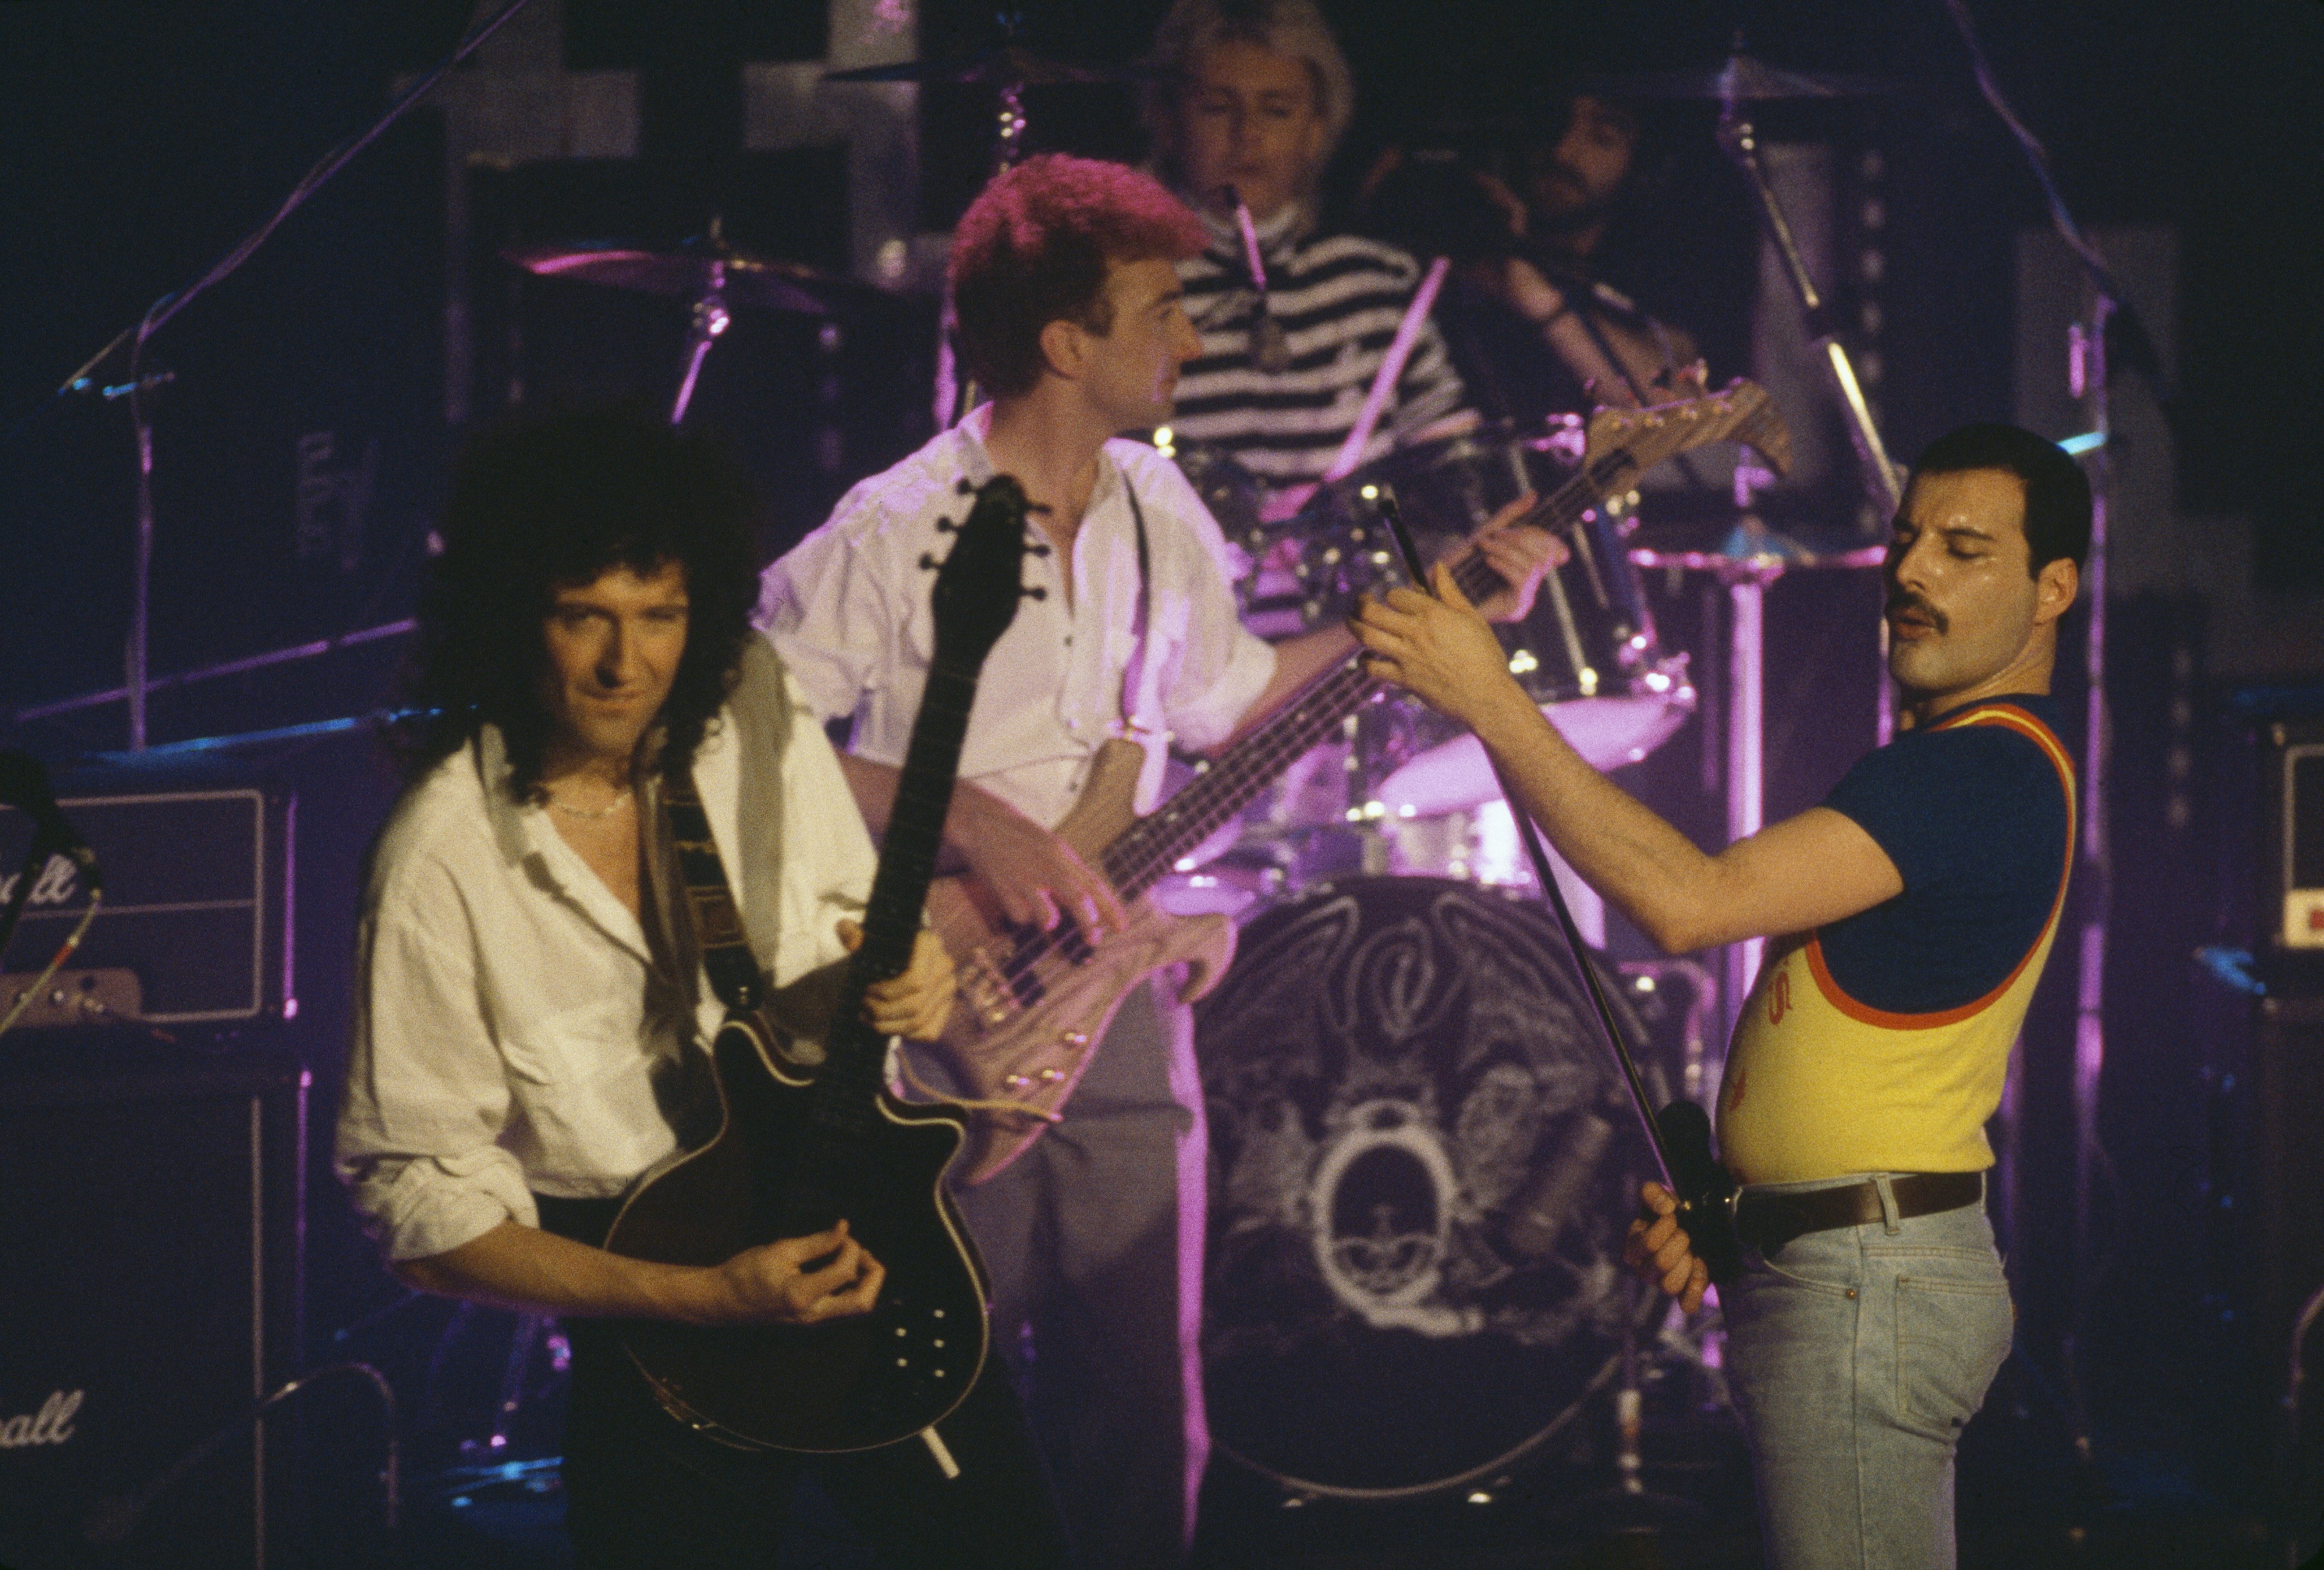 Queen performing on stage, 1986. Left to right: Brian May, John Deacon, Roger Taylor and Freddie Mercury. | Photo: GettyImages